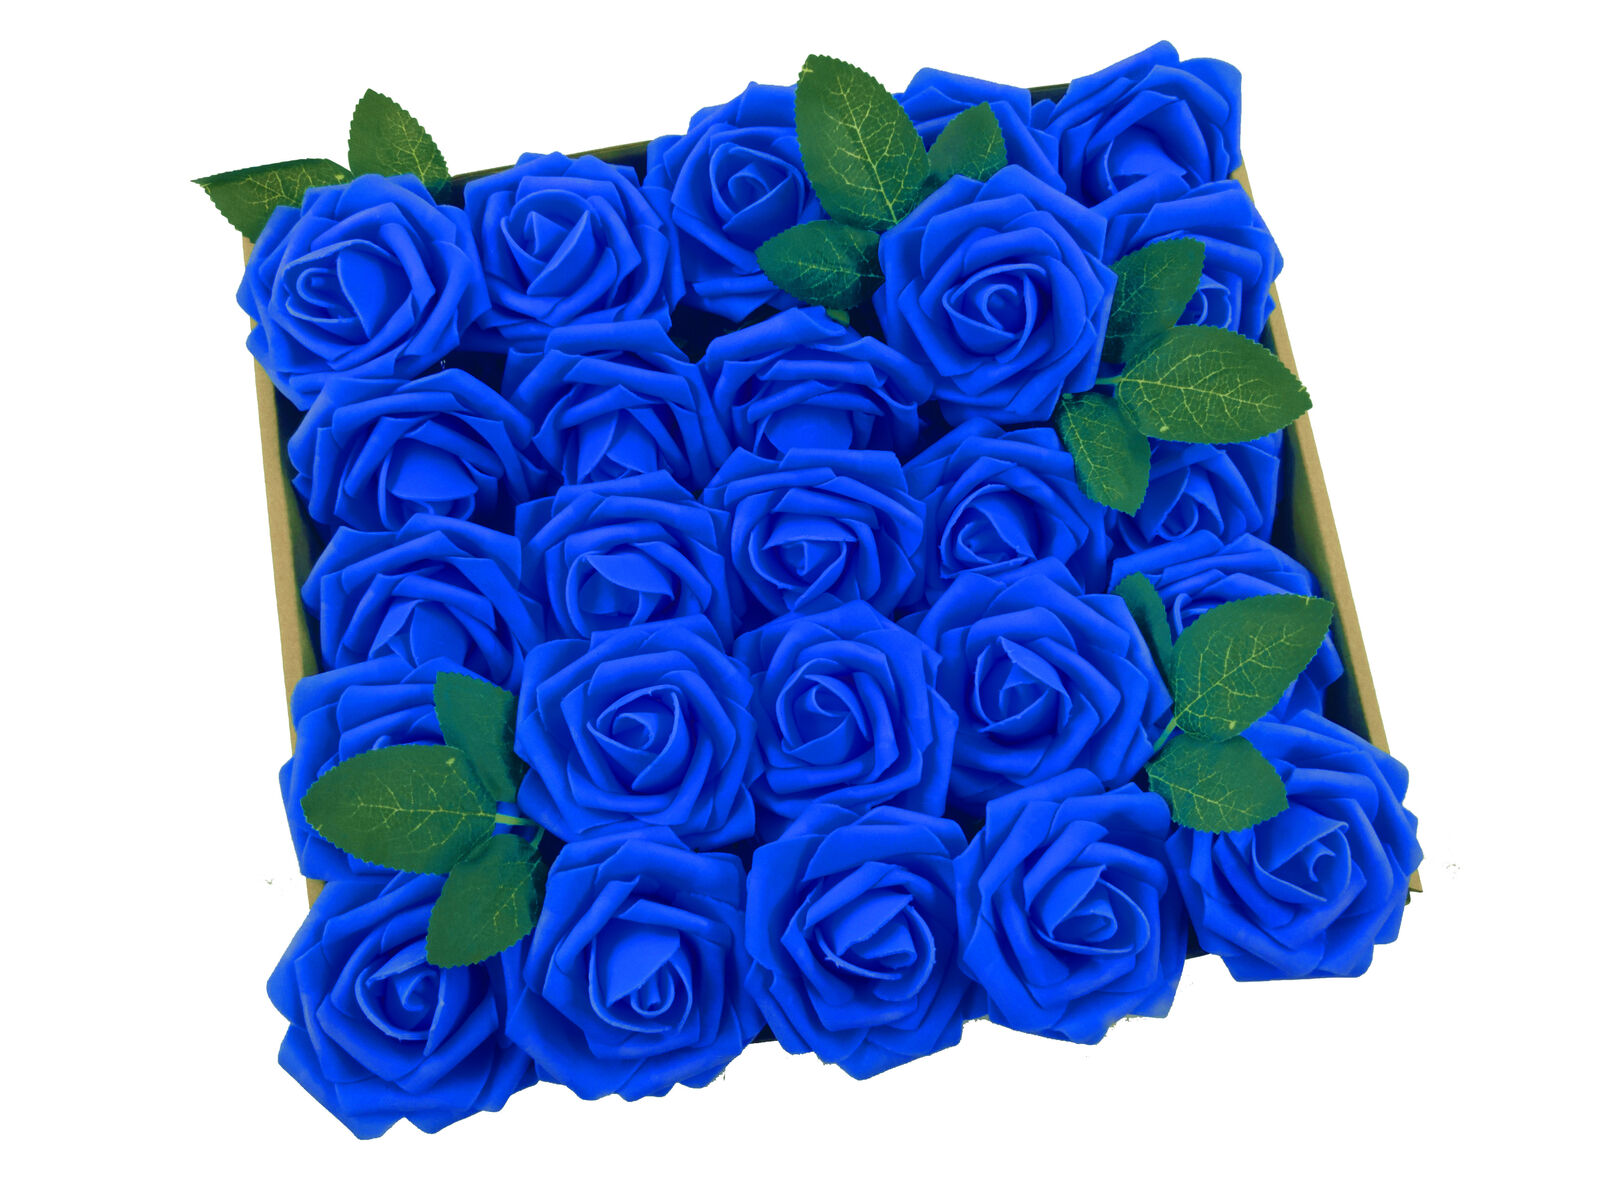 Us 25/50pcs Royal Blue Foam Roses Decoration Diy For Wedding Party Baby Shower